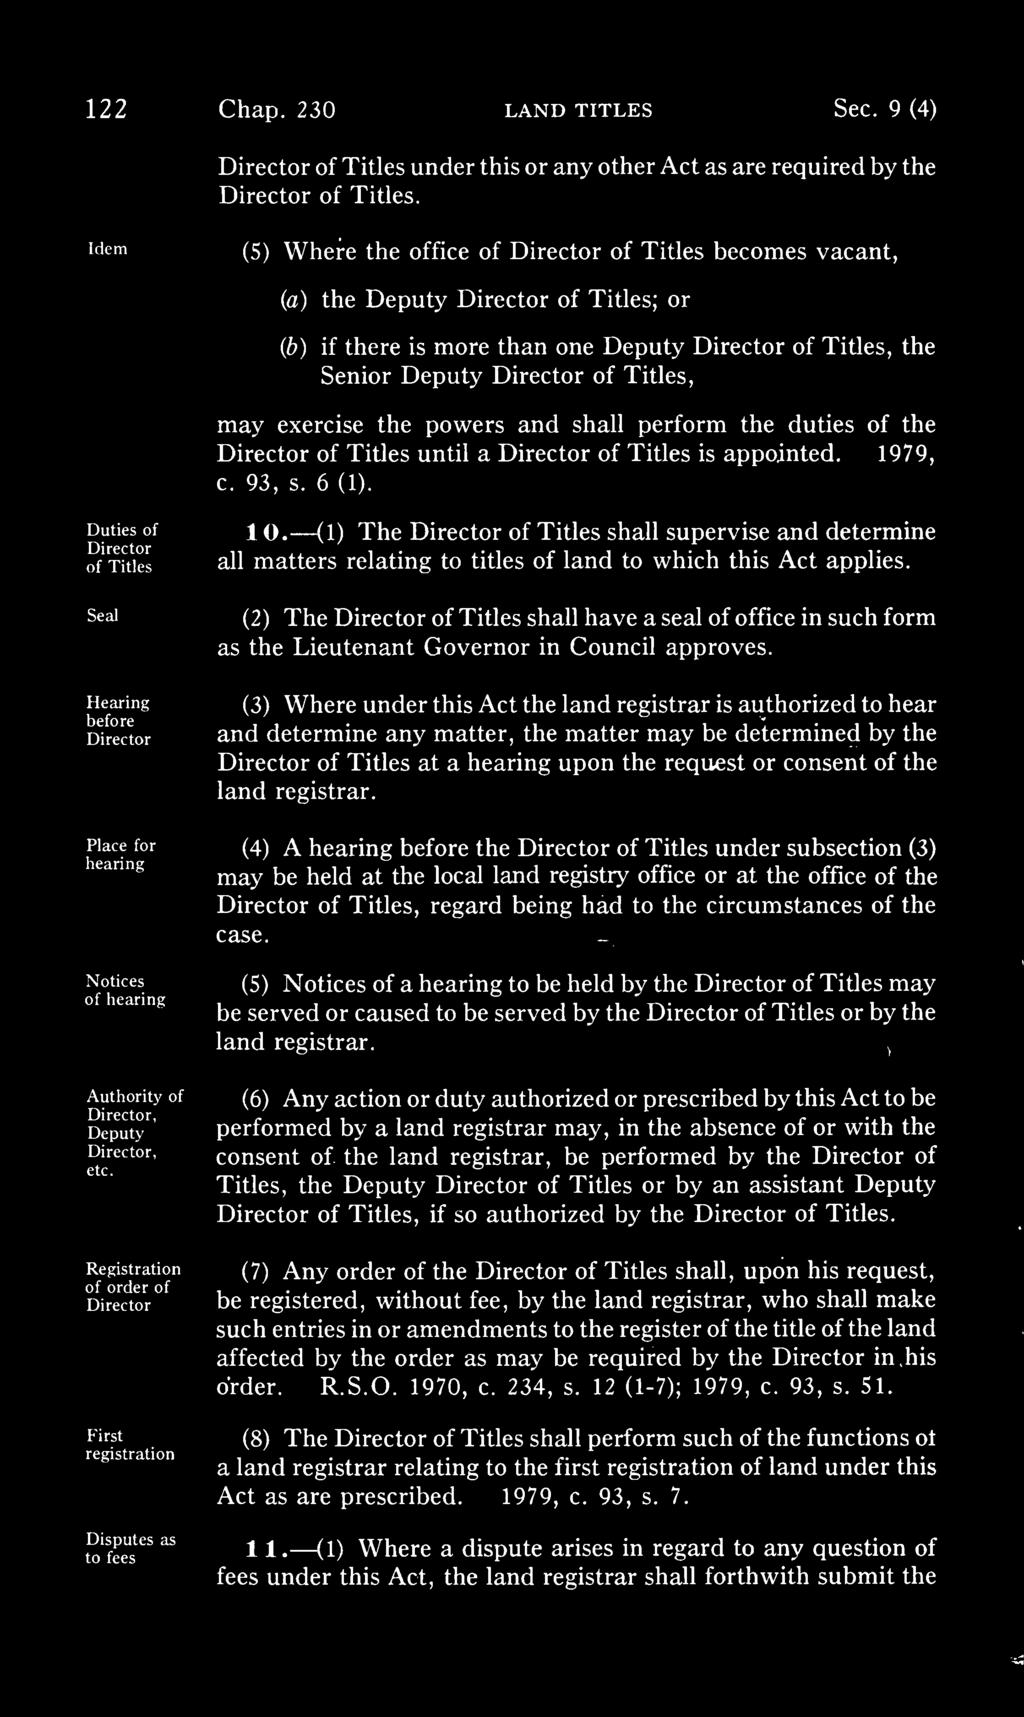 may exercise the powers and shall perform the duties of the Director of Titles until a Director of Titles is appointed. 1979, c. 93, s. 6 (1). Duties of Director of Titles all 1 0.